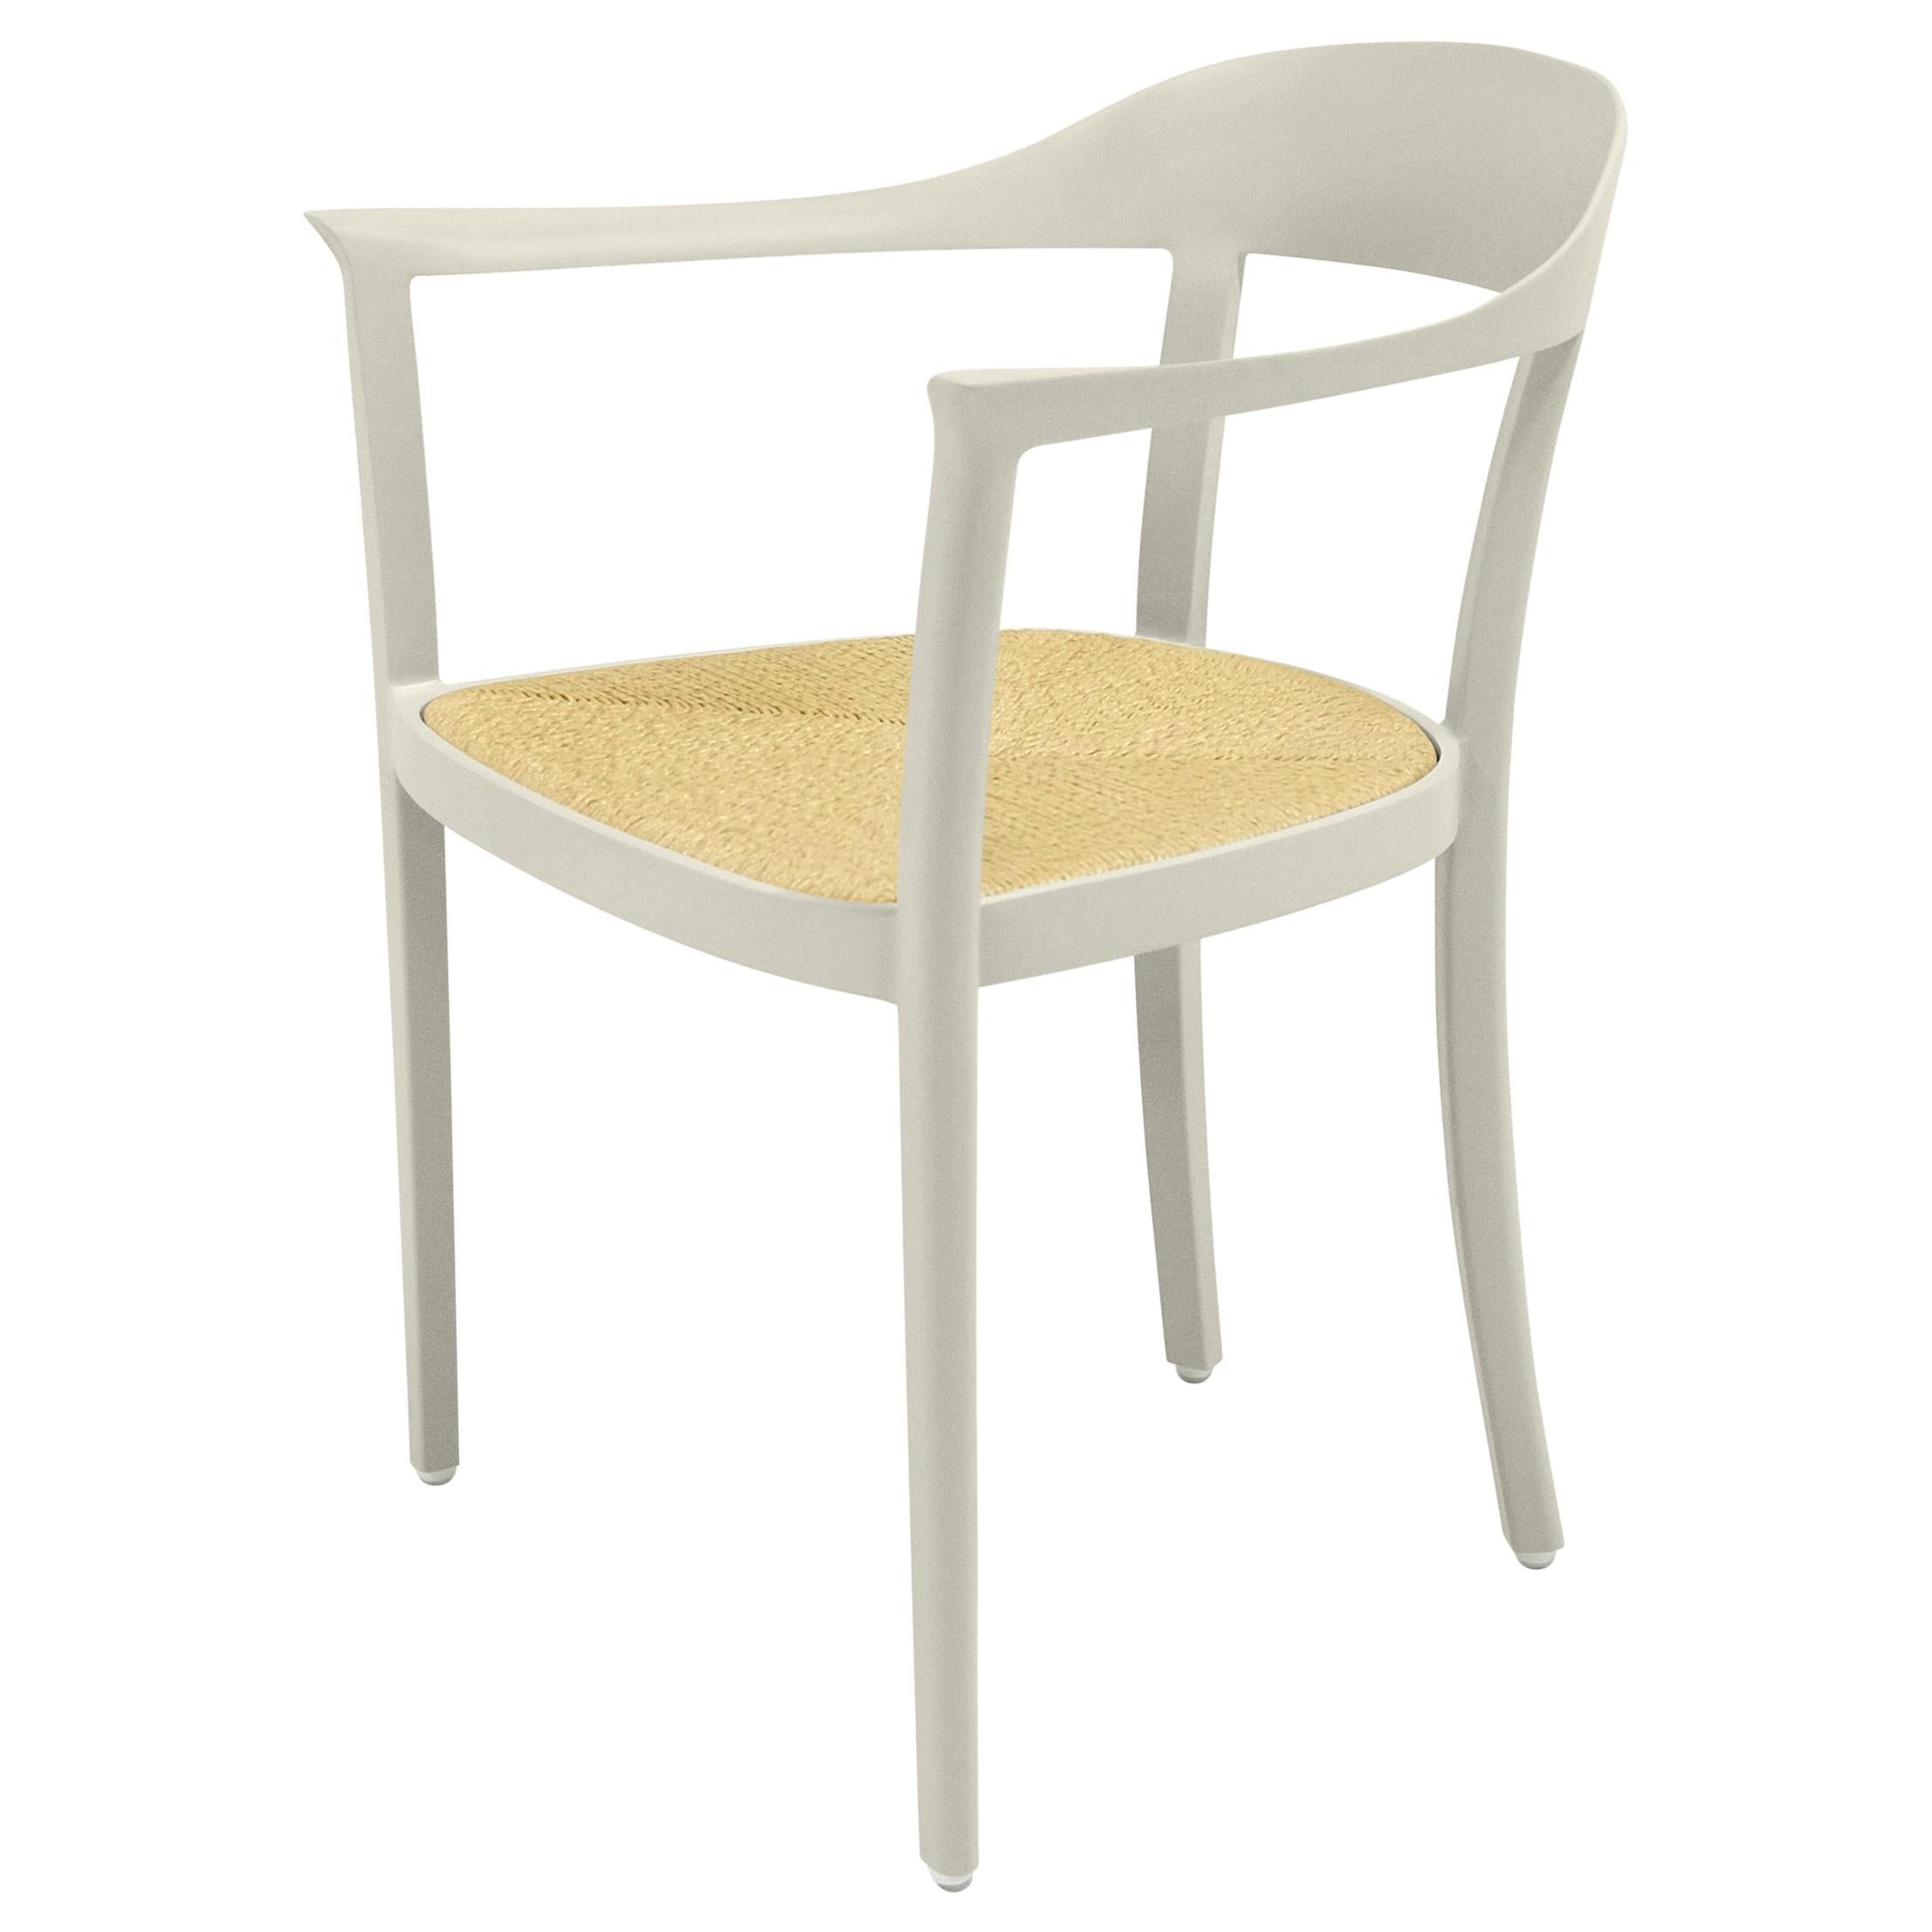 Chesapeake Dining Chair, Pale Grey, Neutral, Woven Rush Seat, Outdoor Garden